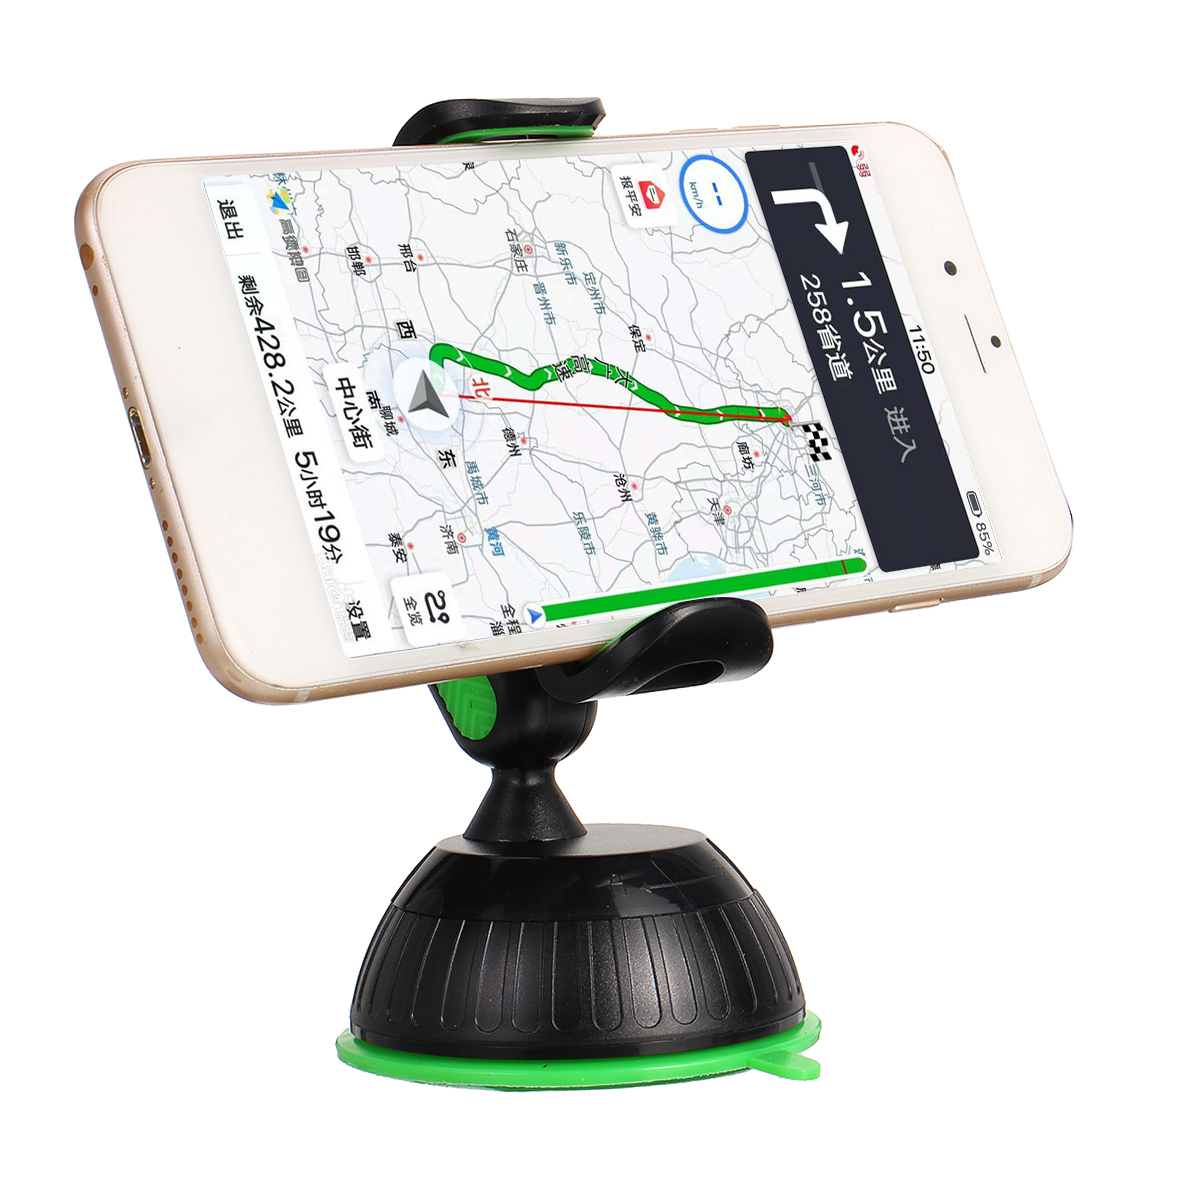 Adjustable-Arm-One-Click-Release-Car-Dashboard-Suction-Cup-Bracket-Mobile-Phone-Holder-Stand-for-4-7-1844270-4